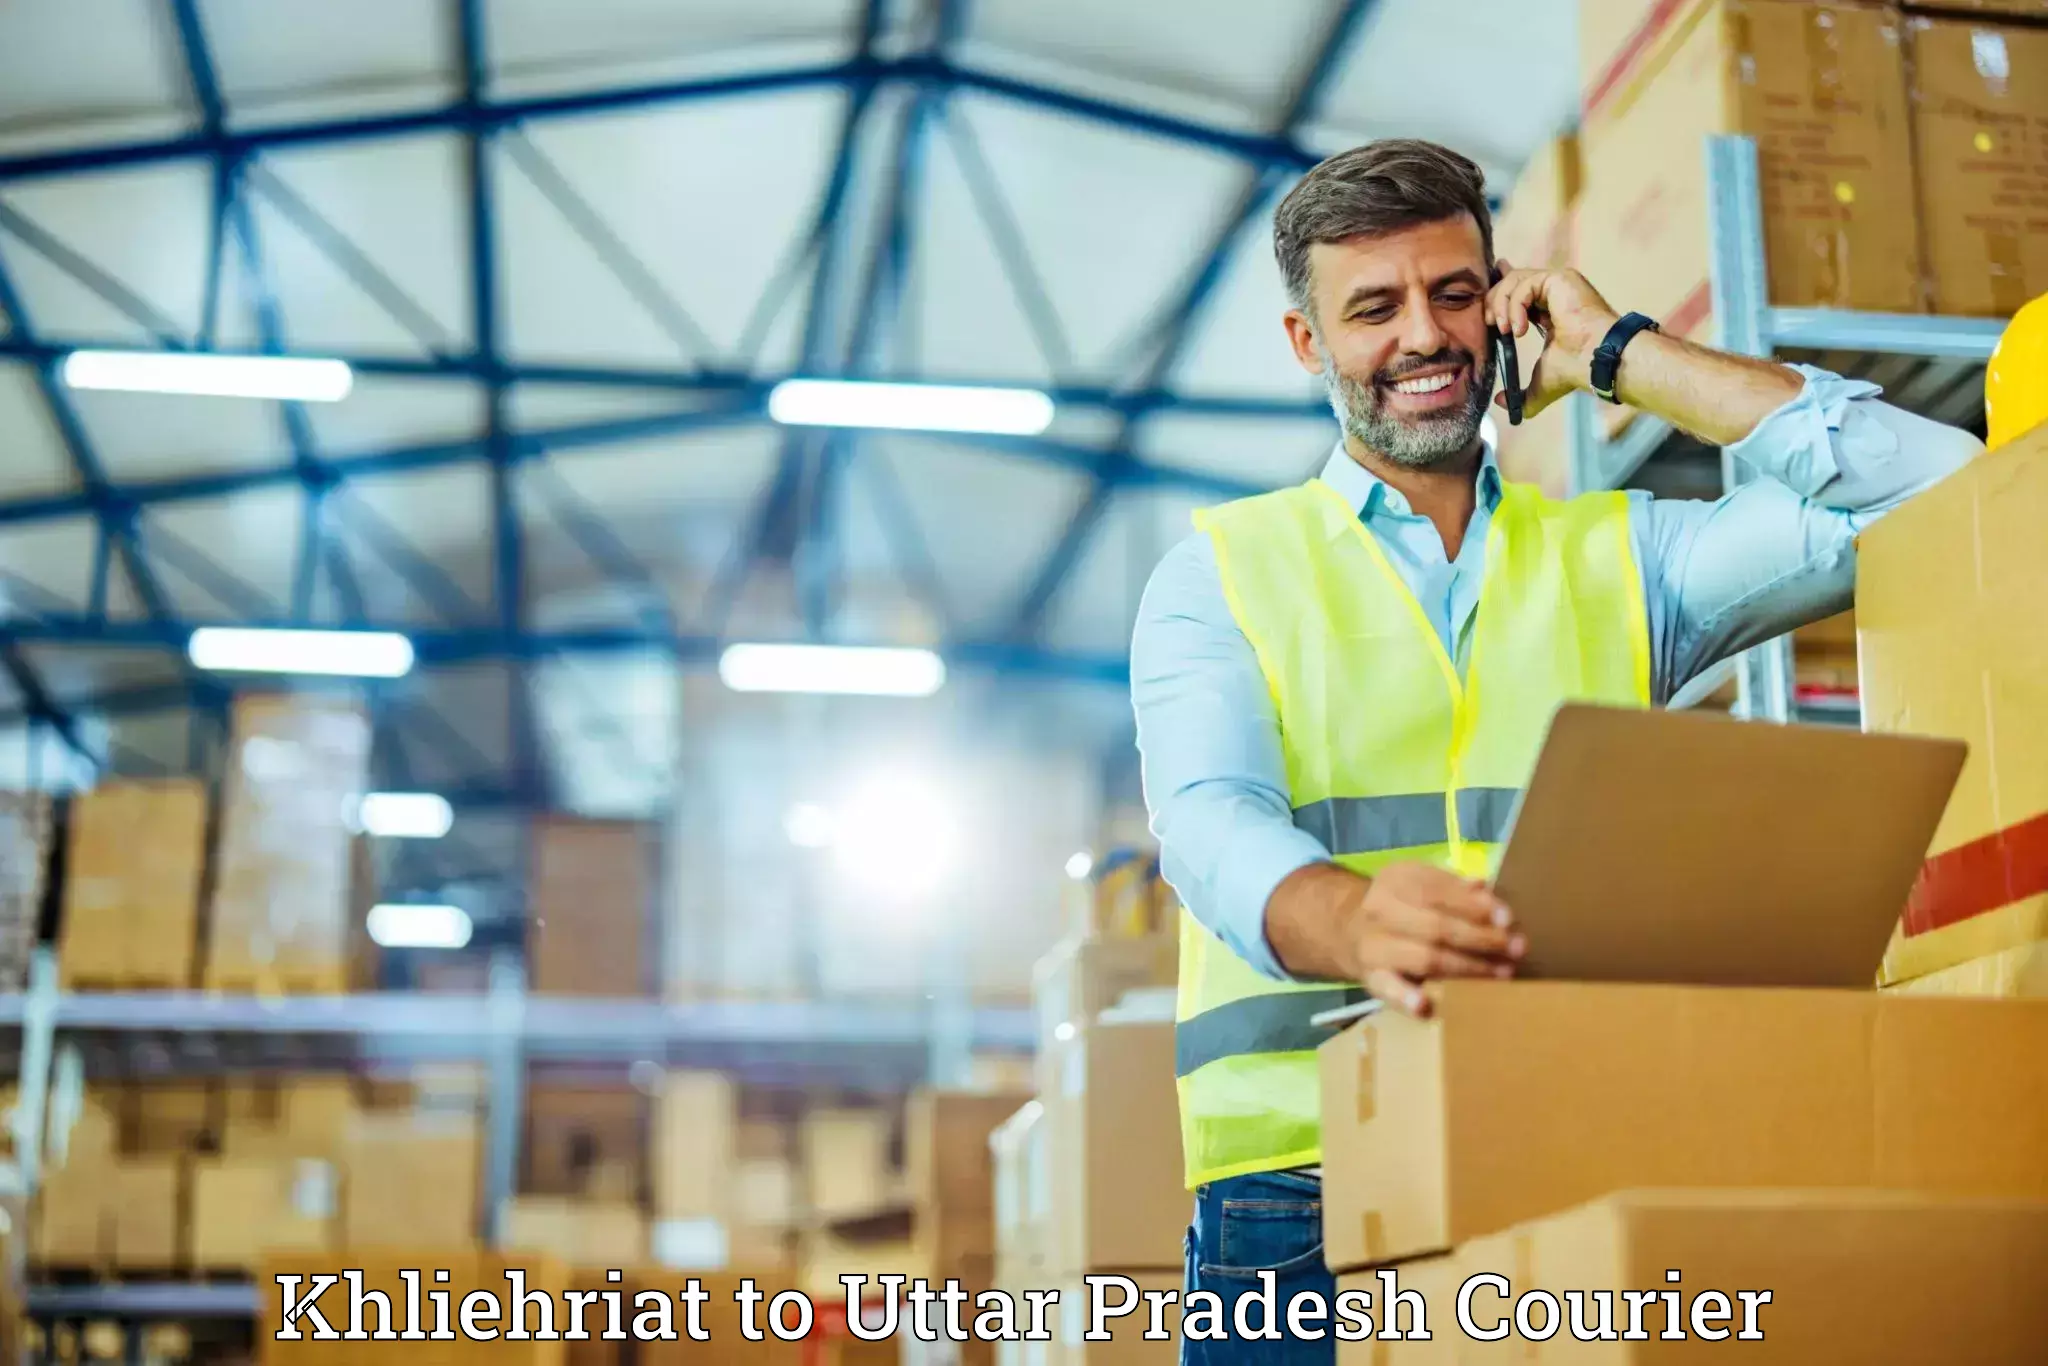 Quality relocation assistance in Khliehriat to Barabanki